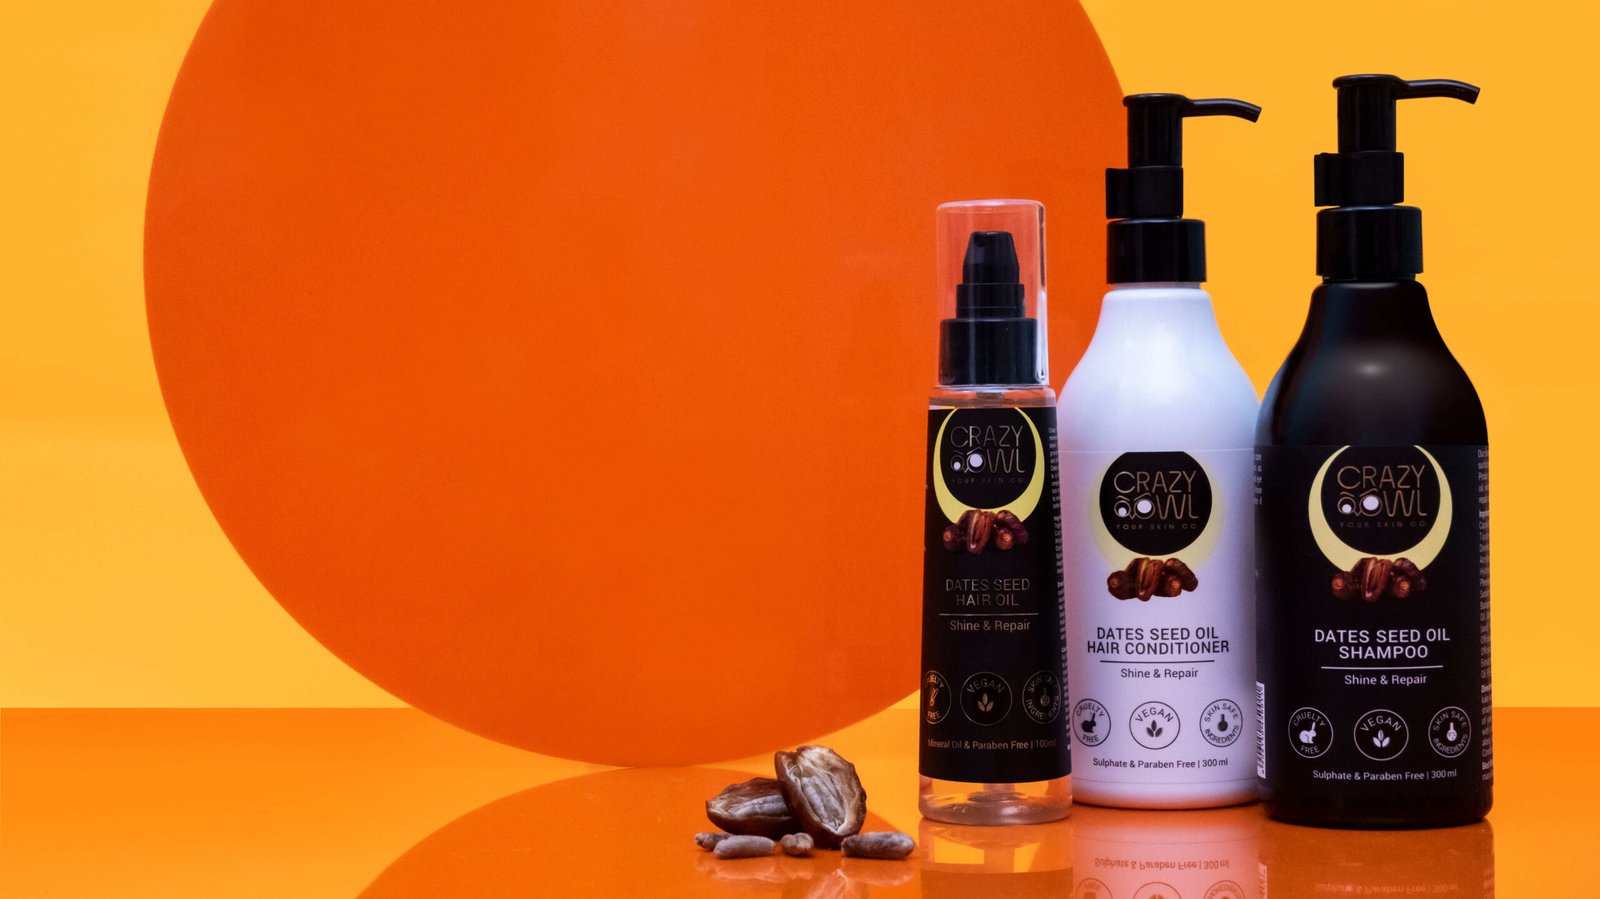 <p style="text-align: justify;">October 2022:</p> <p style="text-align: justify;">Crazy Owl - Your skin Co, a personal care brand, launches Date Seed Hair Oil with the goodness of five nourishing oils. The incredibly beneficial Date Seed Oil has recently gained popularity because it is packed with nutrients that nourish the hair follicles and keep hair at optimal growth and maintenance. Crazy Owl’s Date Seed Hair Oil is infused with Dates Seed Oil, Argan Oil, Macadamia Seed Oil, Almond Oil, and Coconut Oil.</p> <img class="aligncenter wp-image-16456 size-full" src="http://pr.shreyaswebmediasolutions.com/wp-content/uploads/2022/10/Crazy-Owl-10-1-2-scaled.jpg" alt="Crazy Owl" width="2560" height="1438" /> <p style="text-align: justify;">In today's fast-paced world, we don't have time to take care of ourselves. We like to mix different oils at home to create our own formula for preventing hair fall and having long, healthy hair. To make things easier, Crazy Owl has launched this oil, which is infused with 5 nourishing oils and is made of plant-based biodegradable ingredients. It is also vegan and free of mineral oil, sulfates, and parabens. All of the elements used are skin-safe, and the fragrances used are IFRA-certified. It nurtures, hydrates, and nourishes your frizzy hair while infusing it with a warm, woody aroma of dates.</p> <img class="aligncenter wp-image-16458 size-full" src="http://pr.shreyaswebmediasolutions.com/wp-content/uploads/2022/10/Crazy-Owl-7-1-2-scaled.jpg" alt="Crazy Owl" width="1438" height="2560" /> <p style="text-align: justify;">The Date Seed Hair Oil is enriched with essential Vitamin B, E, and Omega fatty acids that help strengthen hair, protect the scalp and hair and boost scalp health. It can be used for regular hair massage and also as an overnight mask, before showering, and even after showers as a styling product. It works best when combined with the Crazy Owl Date Seed Shampoo and Conditioner.</p> <p style="text-align: justify;">Talking about the new launch, Damanjit Kohli and Karishma Sahni, Founders of Crazy Owl, shared, “The new launch addresses the hair nourishment needs of our valuable consumers. The oil is perfect for dry, brittle, and damaged hair. Dates Seed Hair Oil is ideal for those who want to grow their hair long, strong, and shiny. We are ecstatic to be able to launch a product that we believe is clearly needed in the market.”</p>